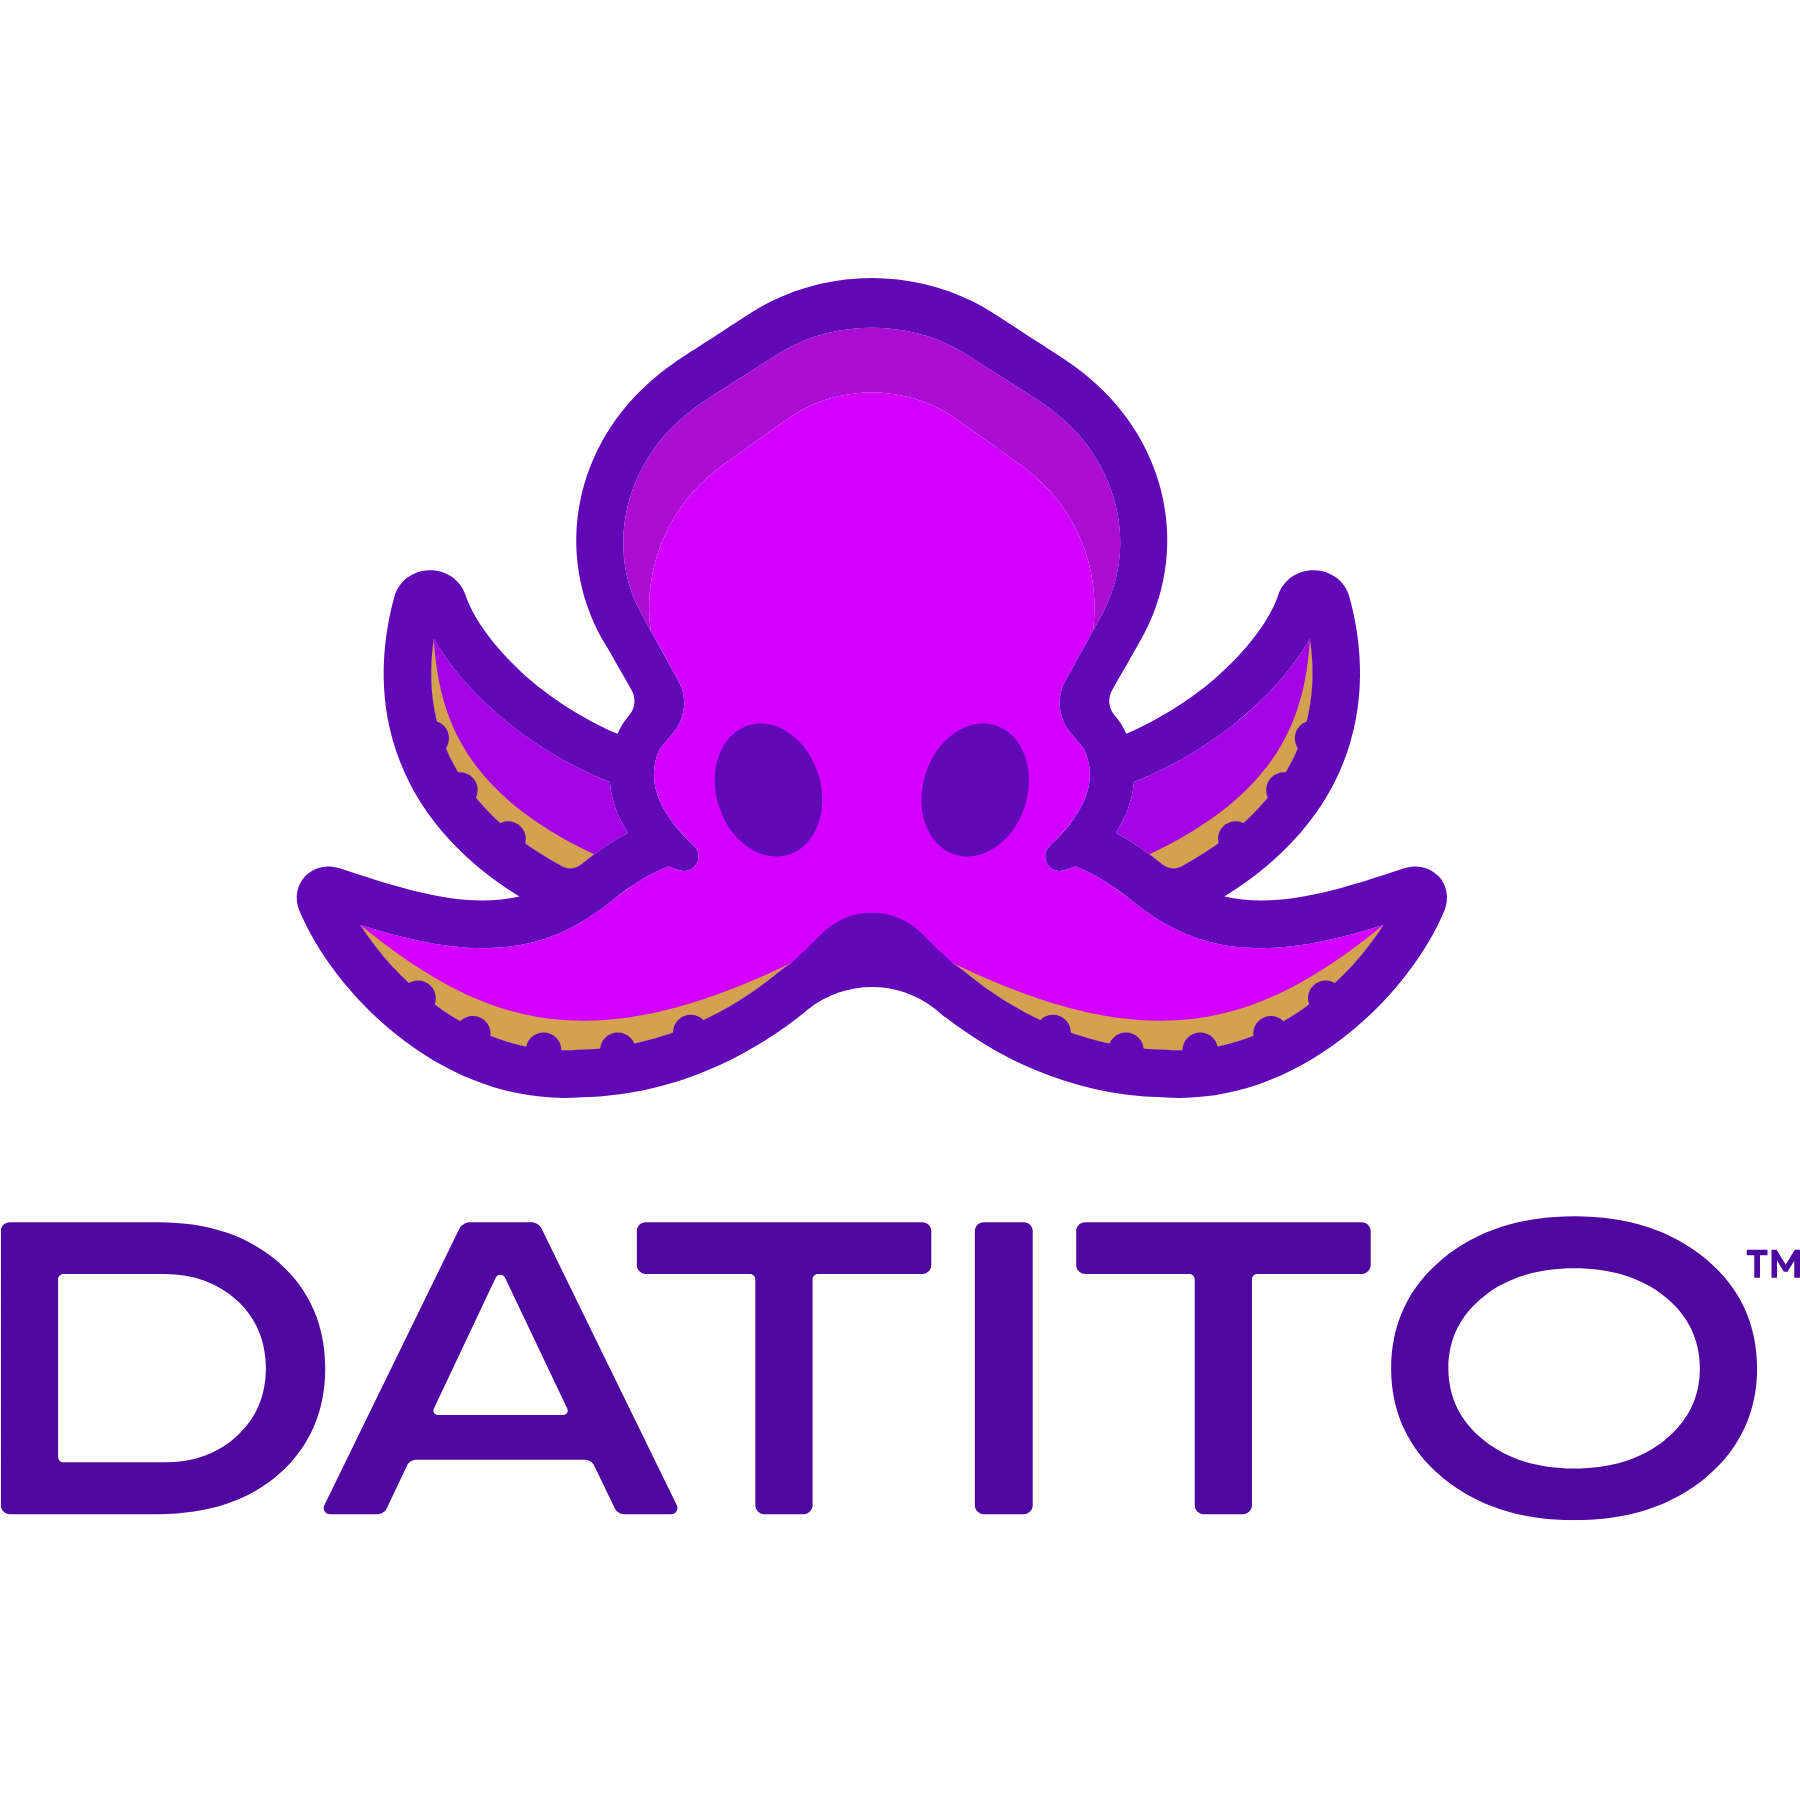 Datito 4 - LogoLounge 15 Entry logo design by logo designer Red Kite Design for your inspiration and for the worlds largest logo competition